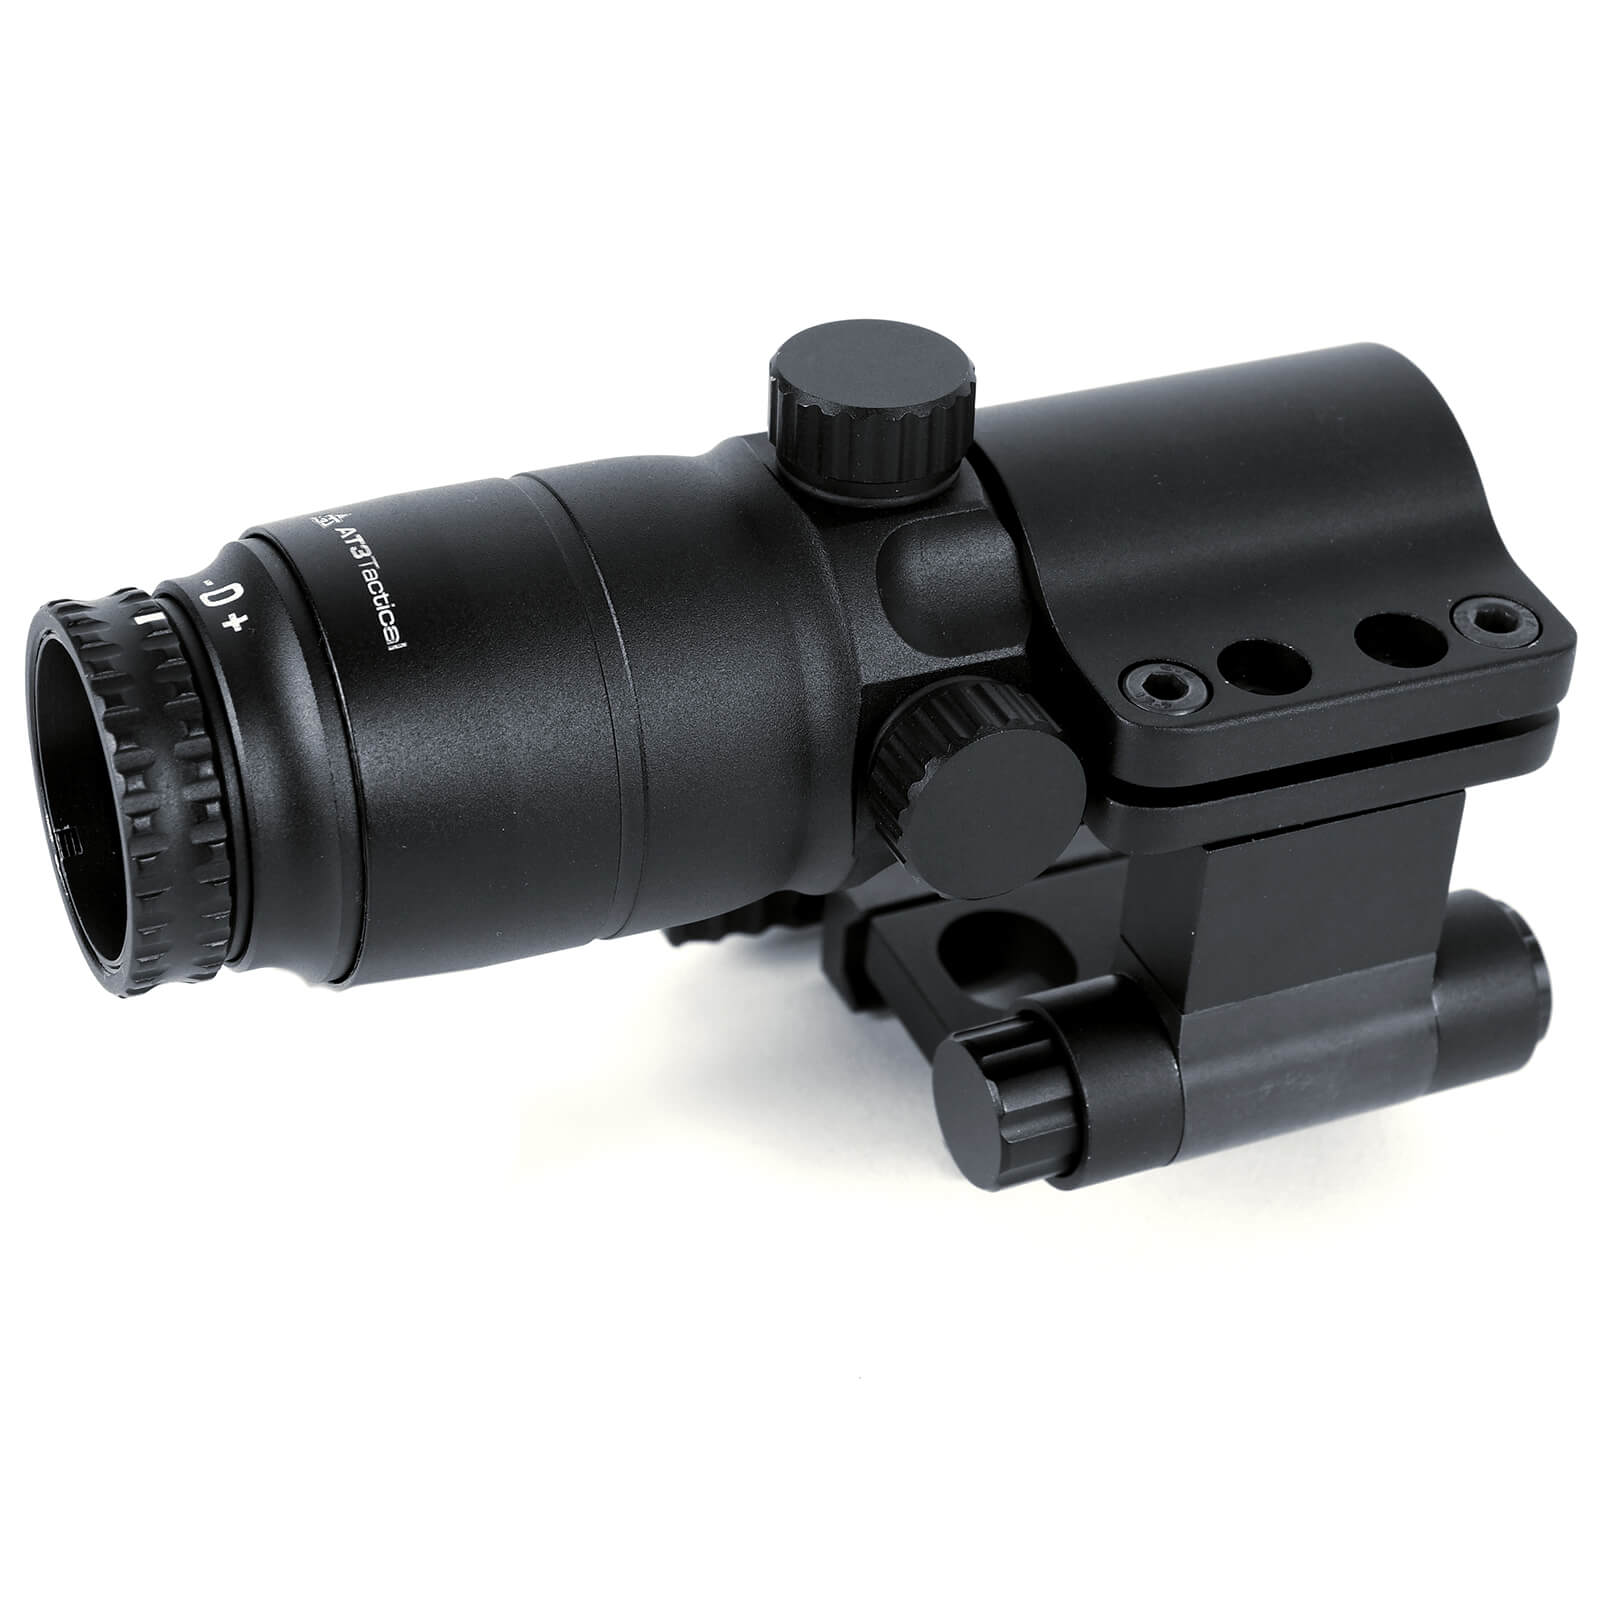 AT3 4xRDM 4x Red Dot Magnifier with Flip to Side QD Mount